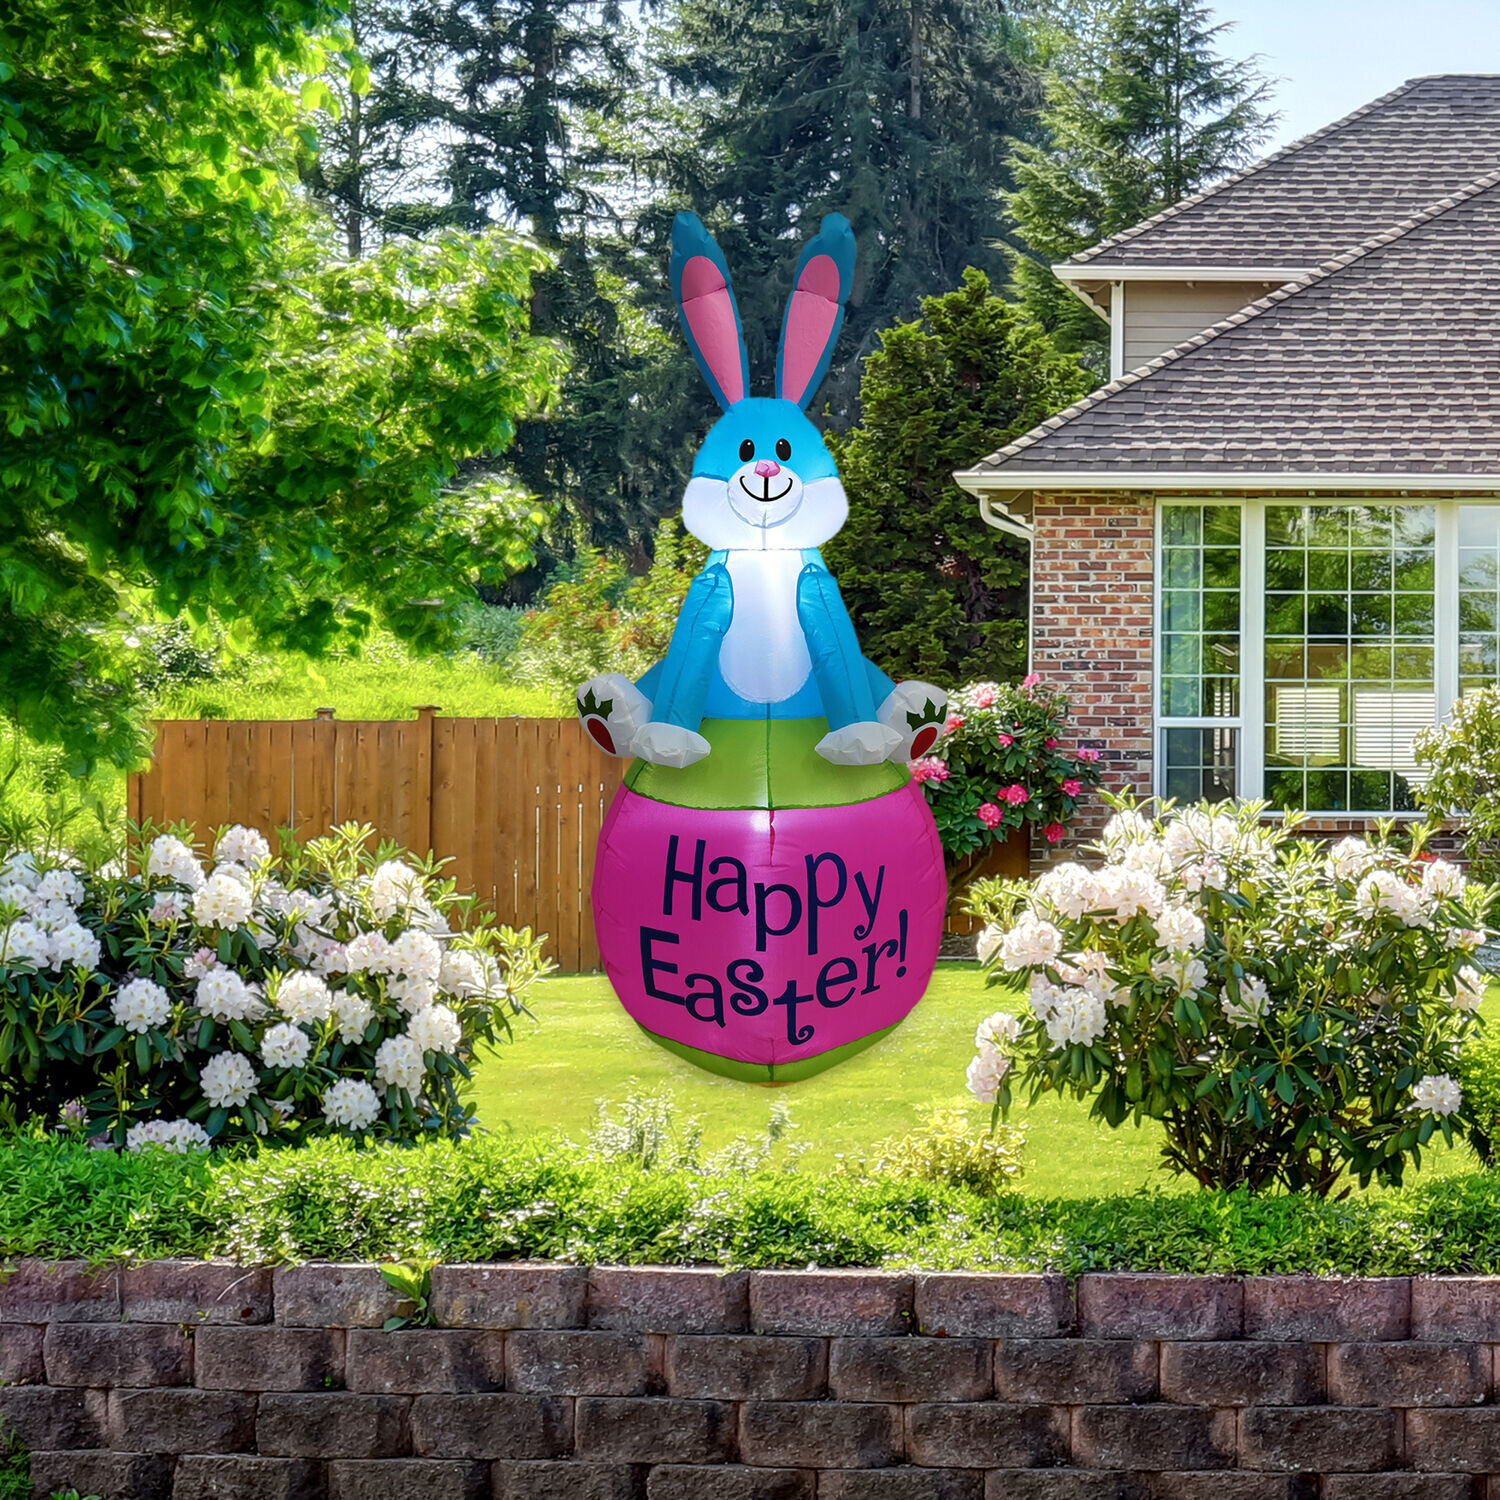 The Holiday Aisle® 5-Ft. Tall Blue Bunny Rabbit Sitting On A Happy Easter Egg, Outdoor/Indoor Blow Up Spring Inflatable With Lights